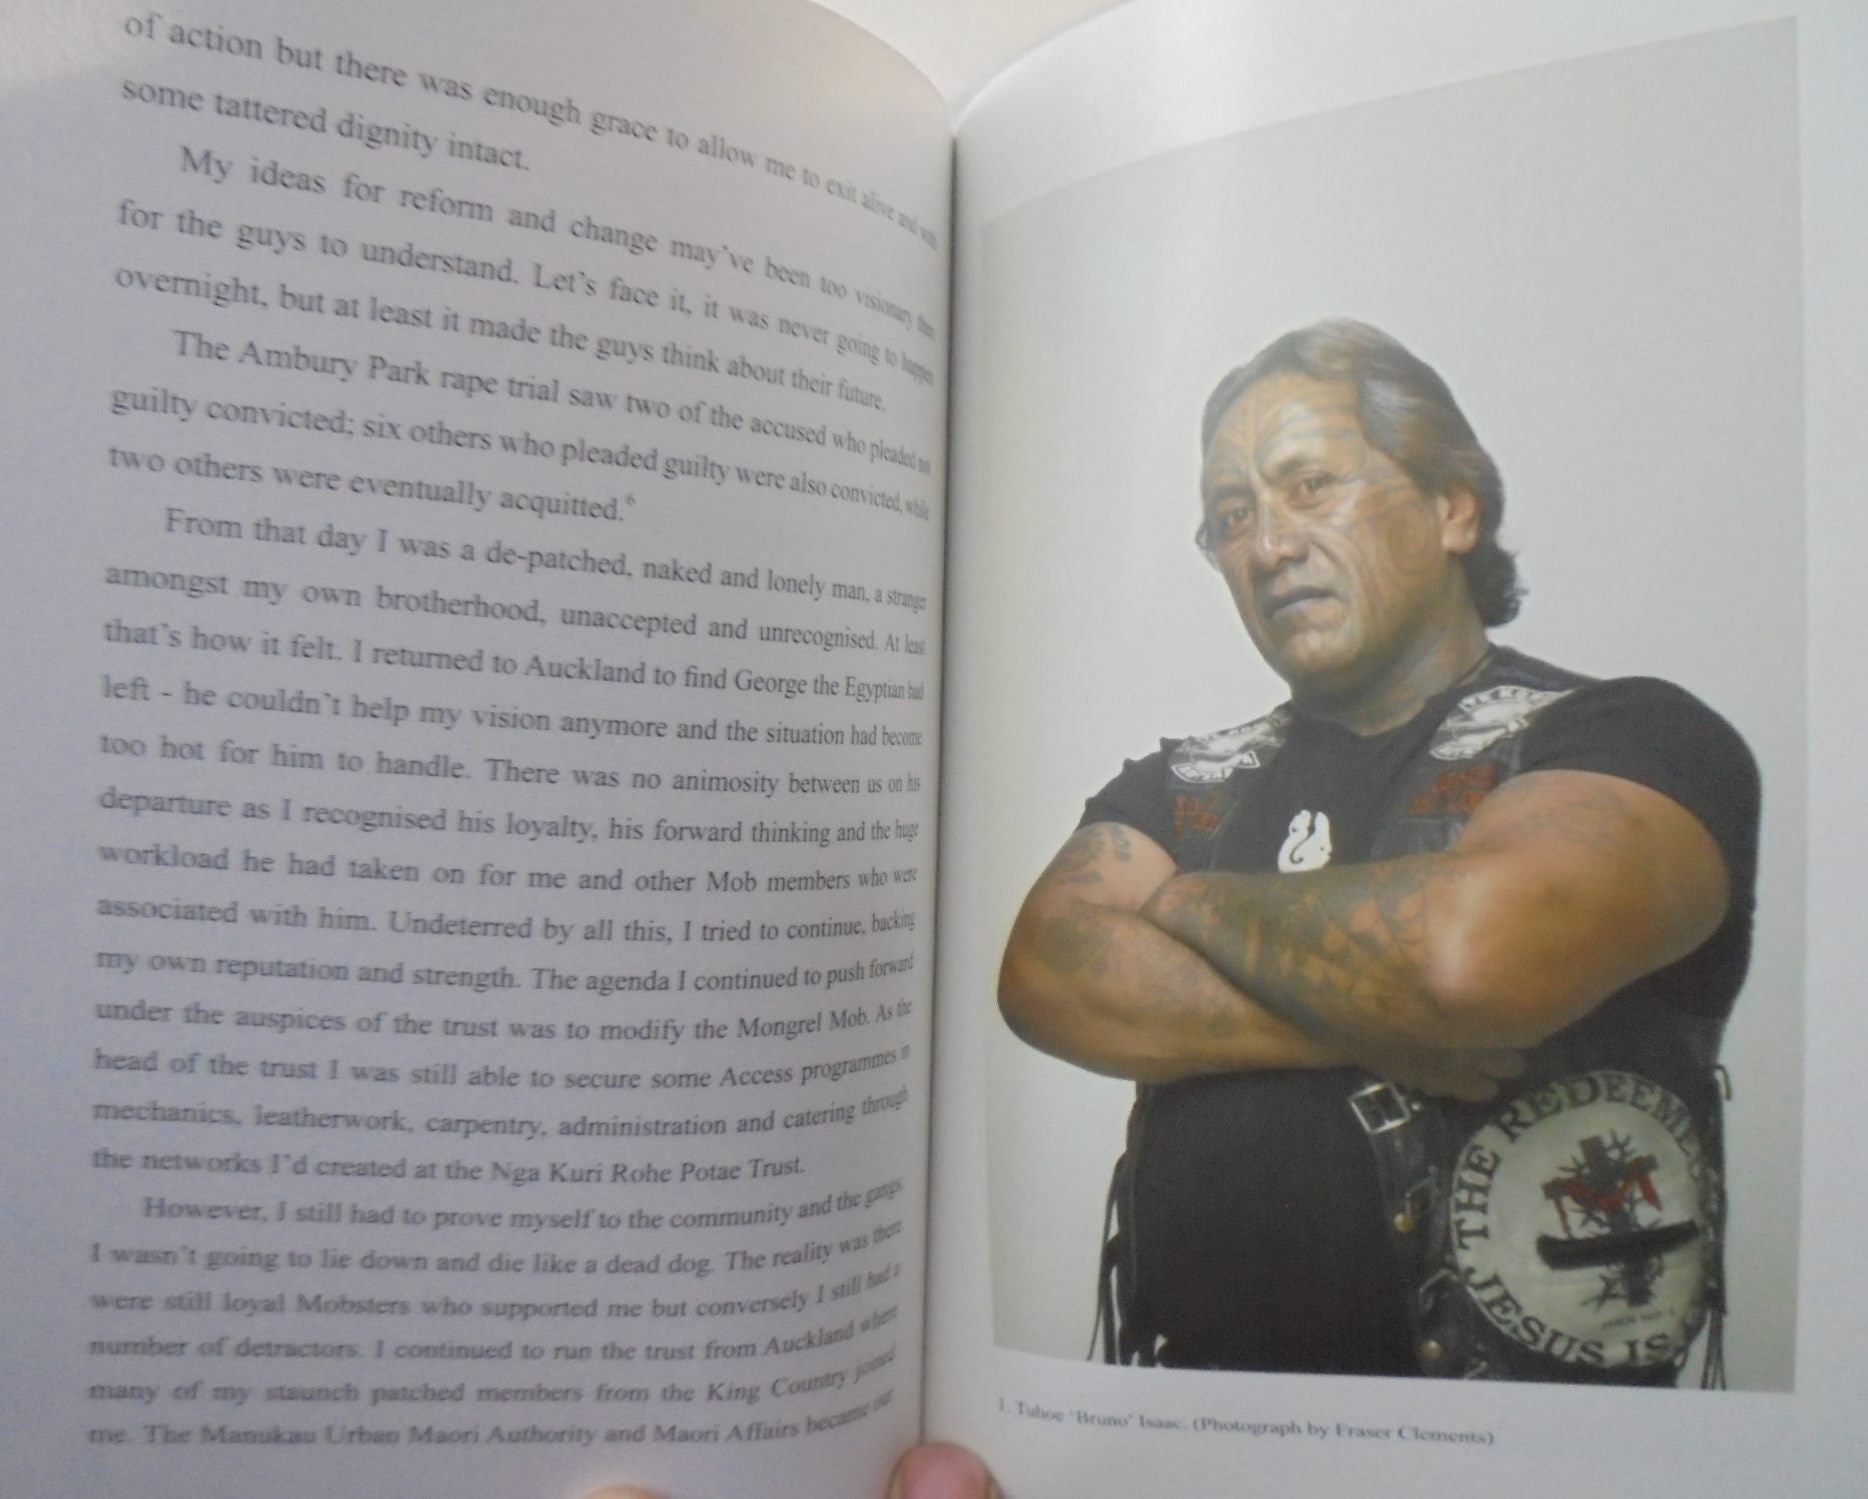 True Red. The Life of an Ex-Mongrel Mob Gang Leader. SIGNED By Tuhoe 'Bruno' Isaac, Bradford Haami.